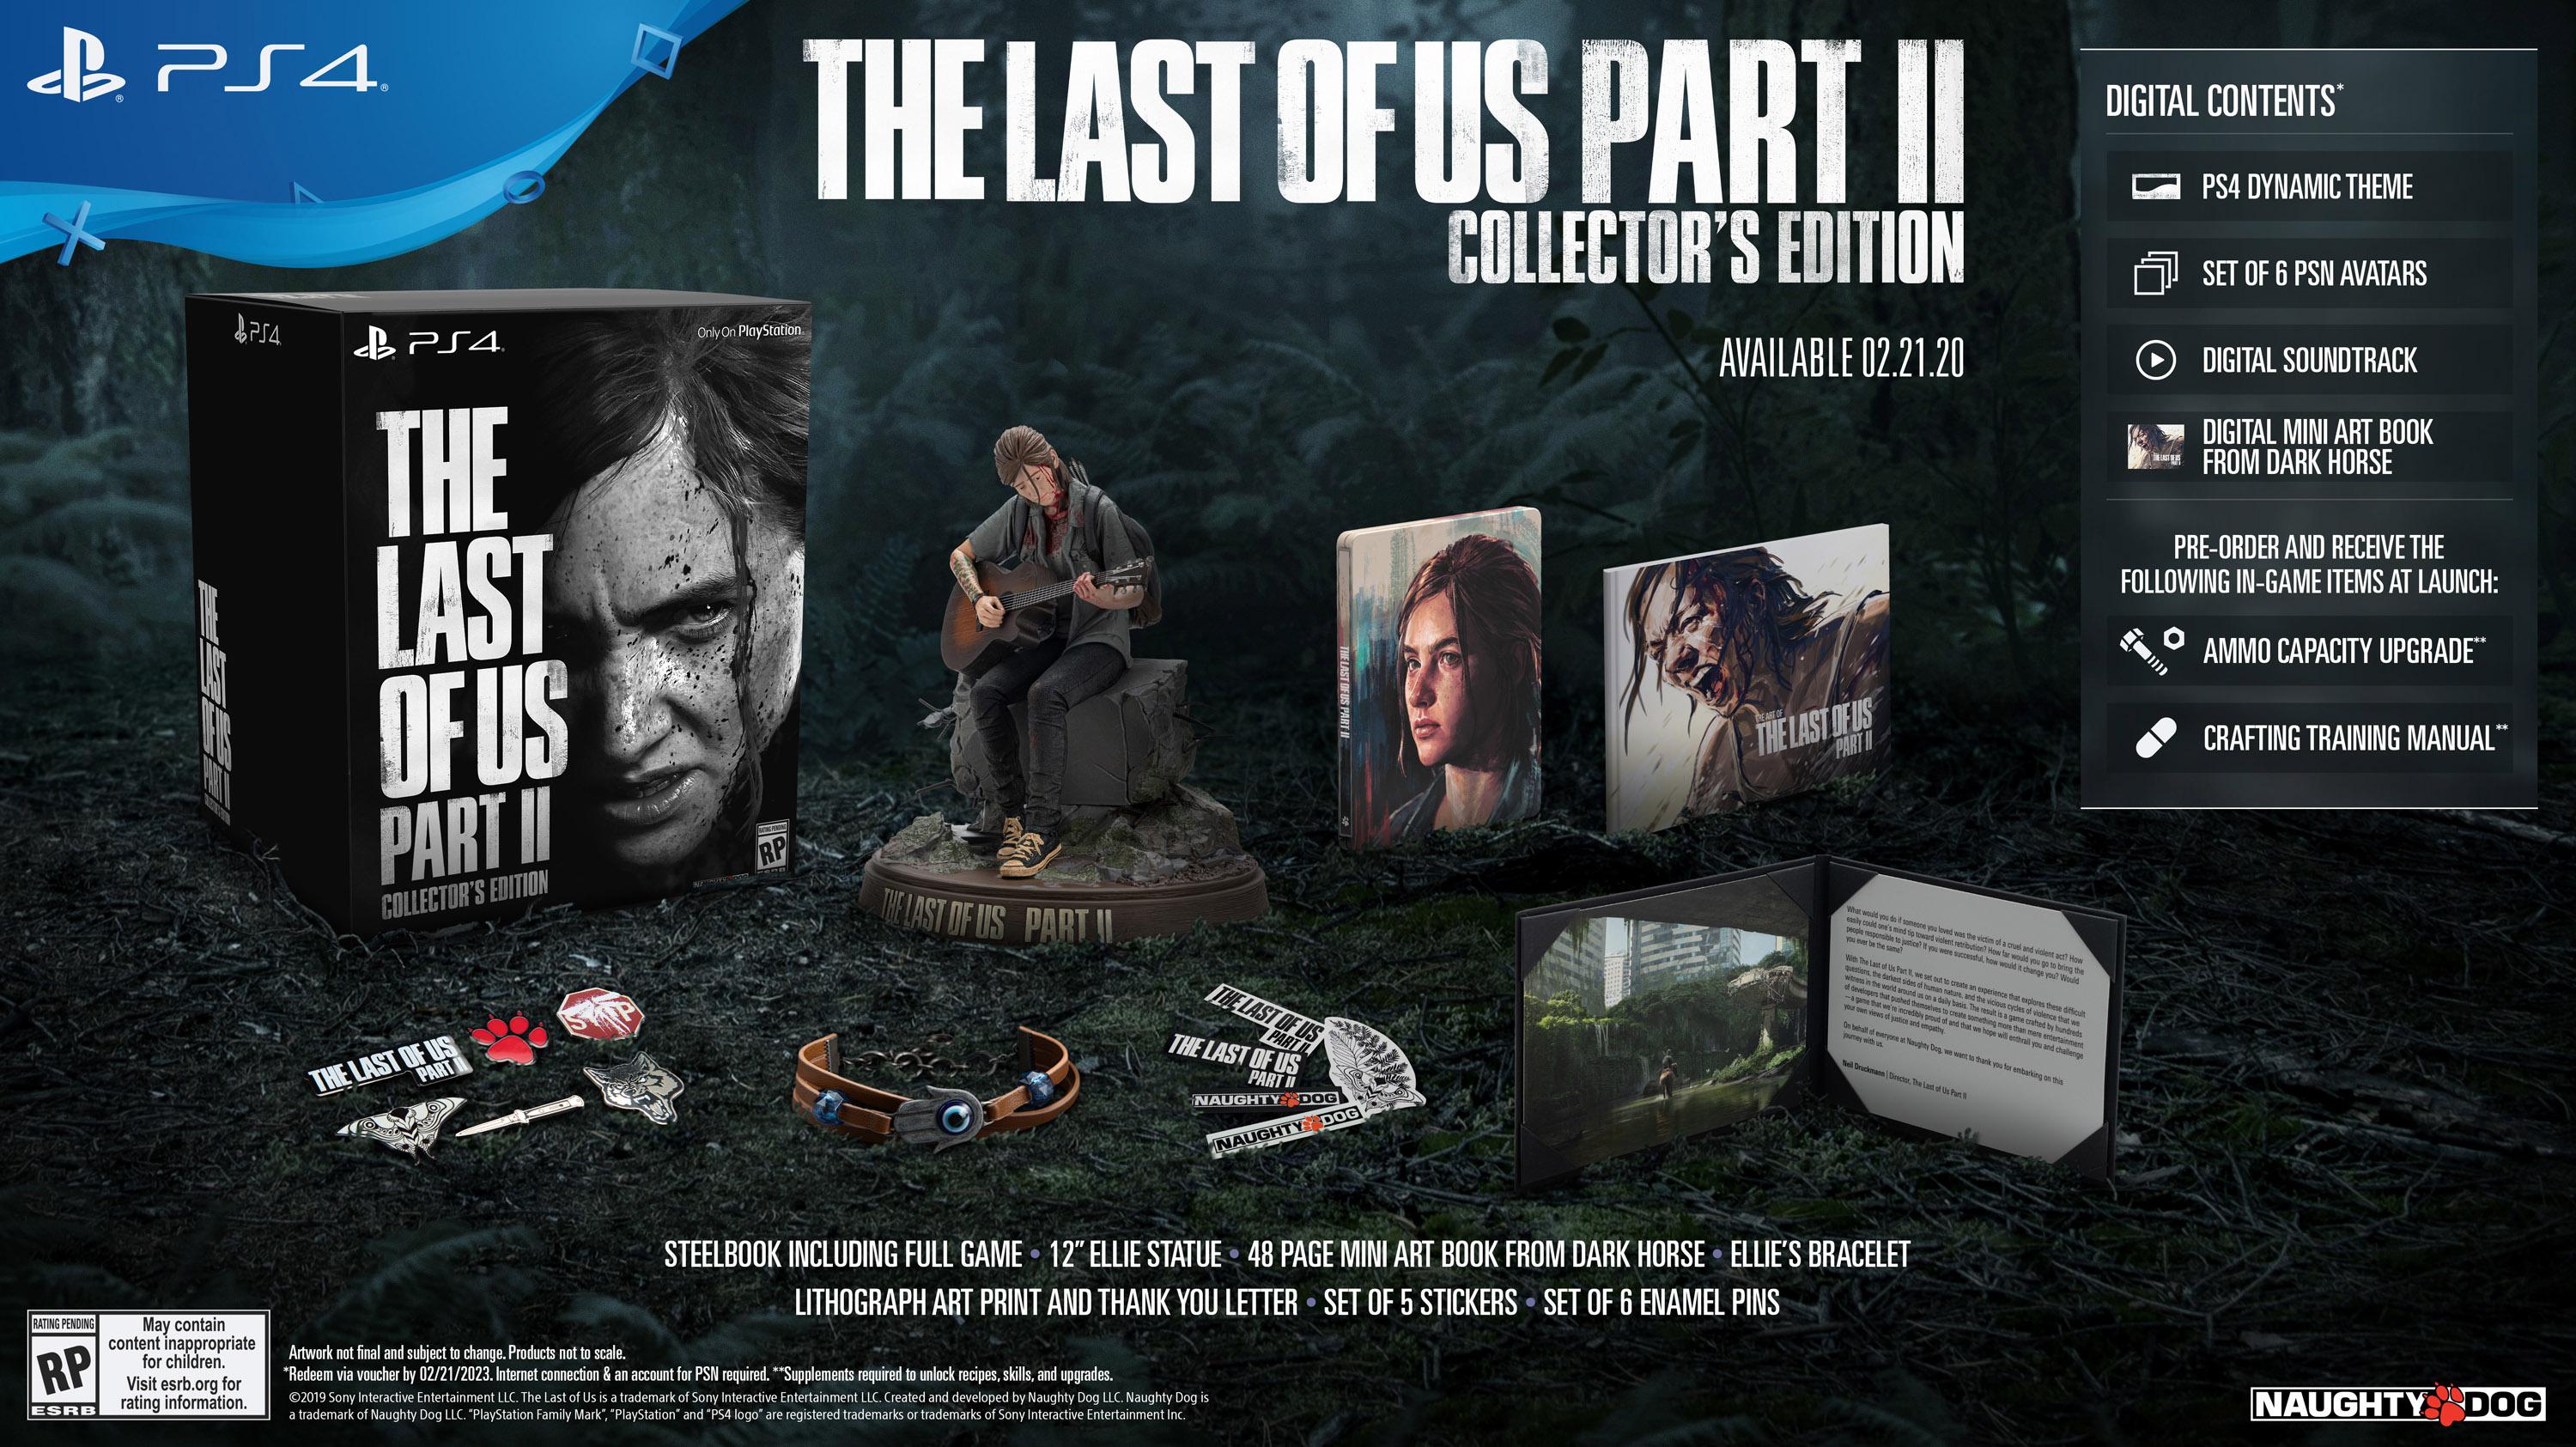 Naughty Dog on X: ONE WEEK until The Last of Us Part I debuts on PC!  There's still time to pre-purchase the Digital Deluxe edition, which comes  with early unlocks of in-game